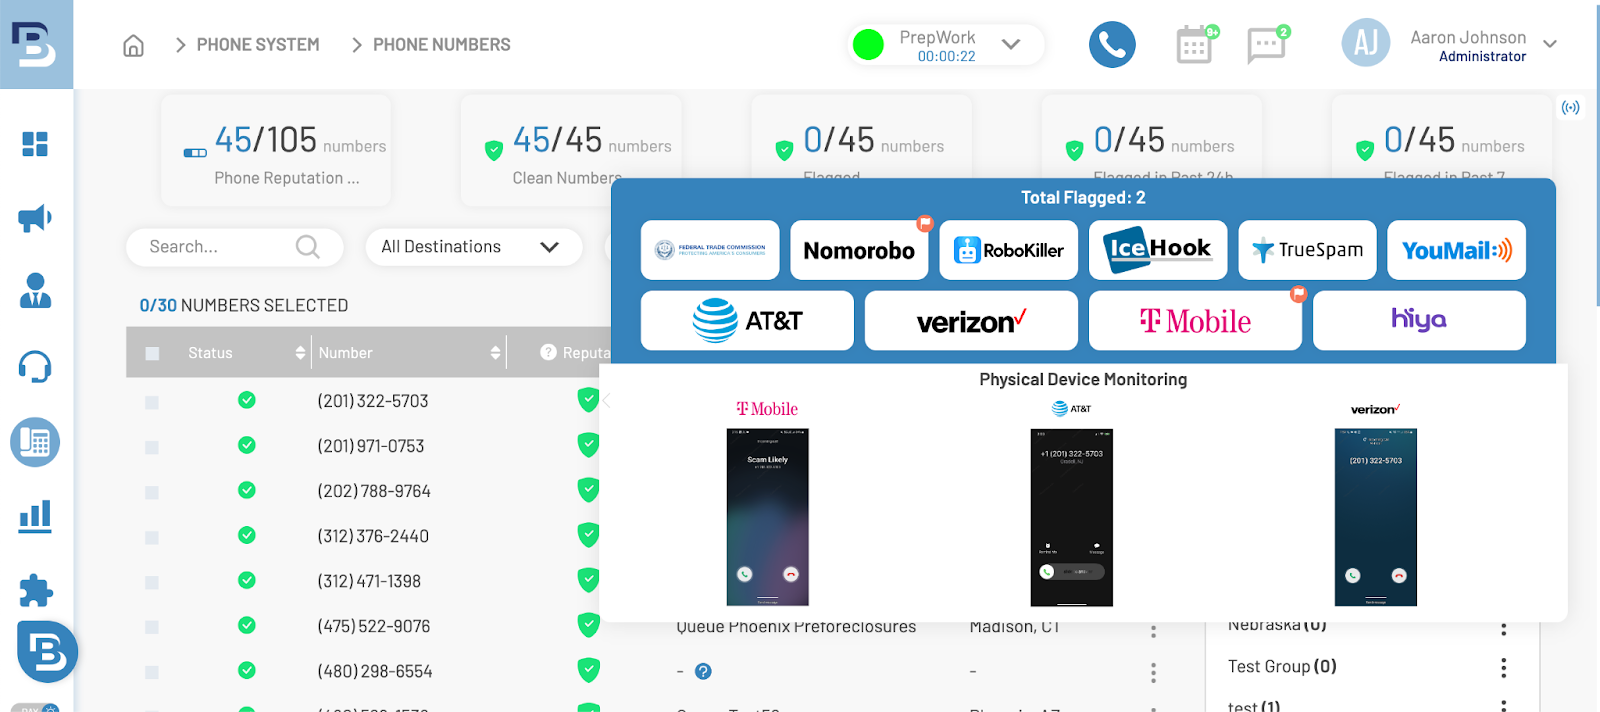 BatchDialer’s phone reputation monitoring dashboard shows you which carriers have flagged your number so you know which carriers to contact.